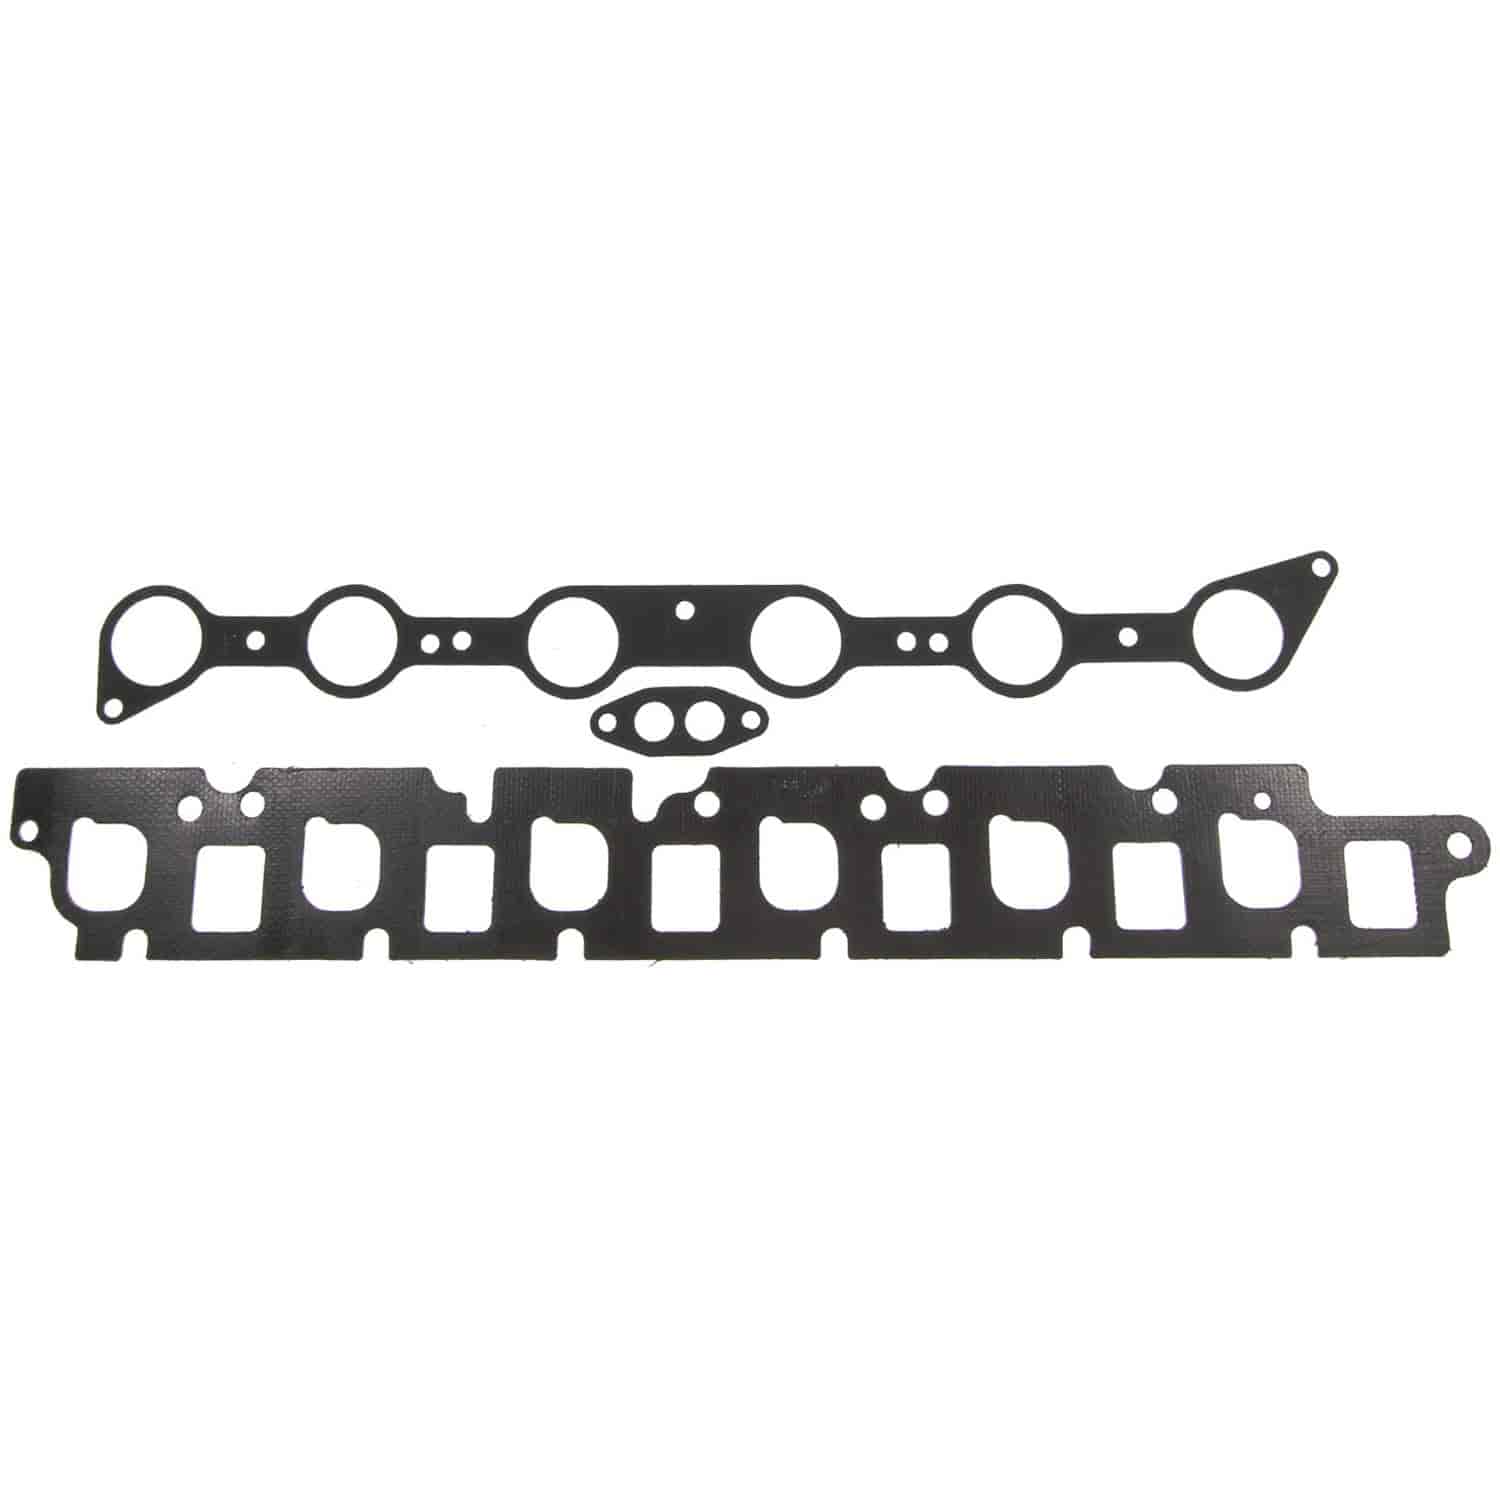 Intake And Exhaust Manifold Set Ford-Trk&Ind 300 4.9L 6 Cyl 87-94 int